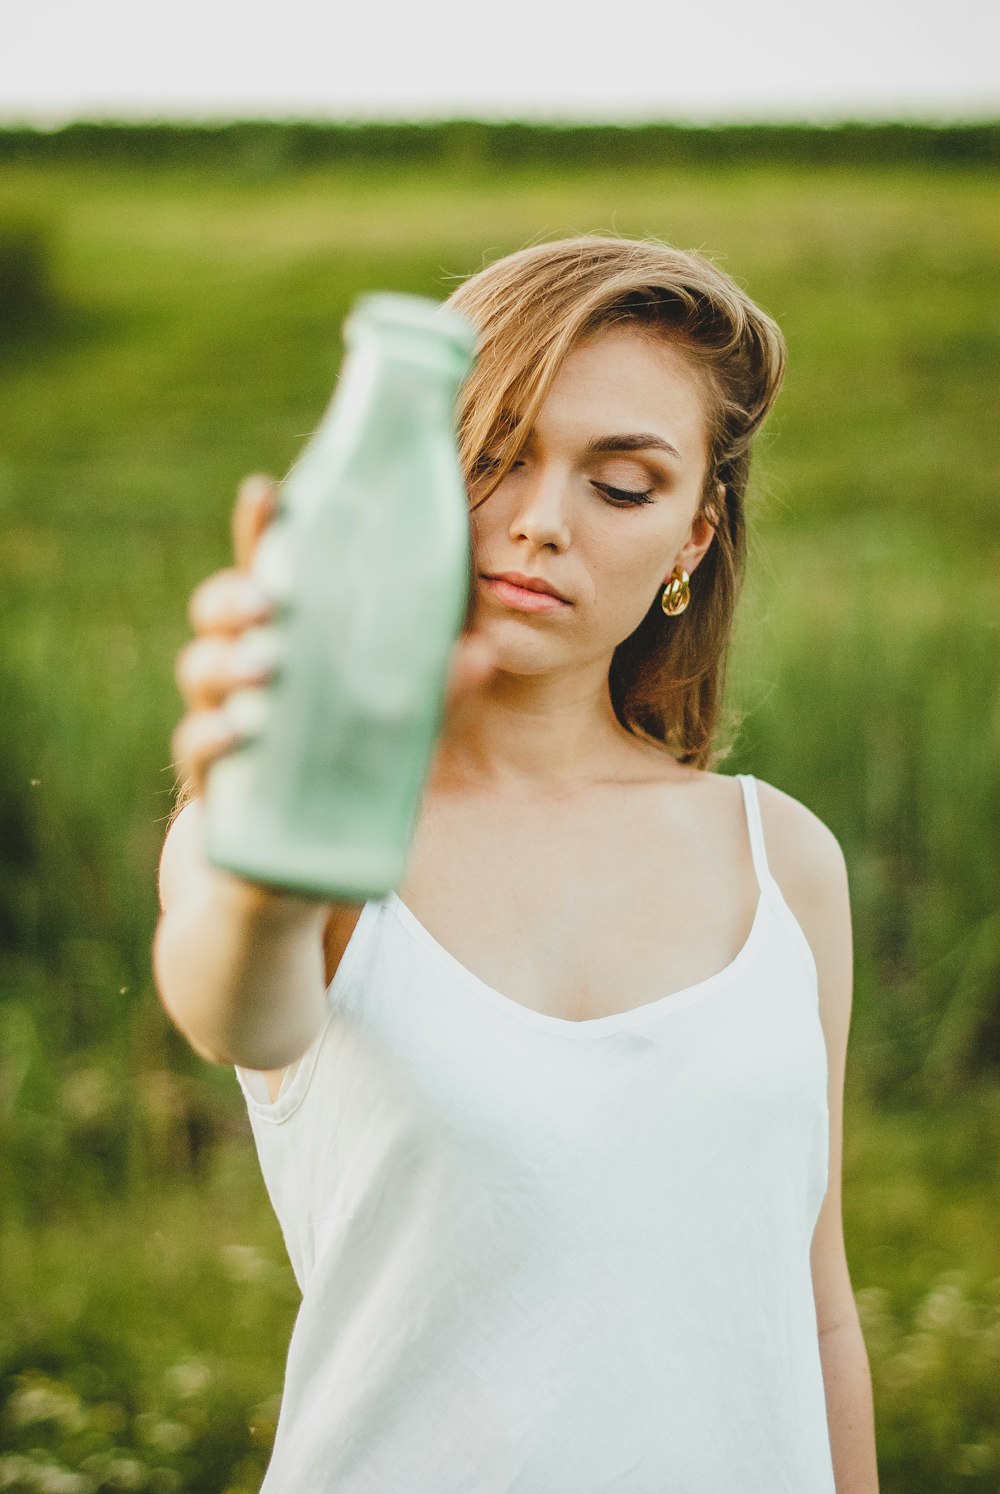 woman in white tank top holding clear glass bottle